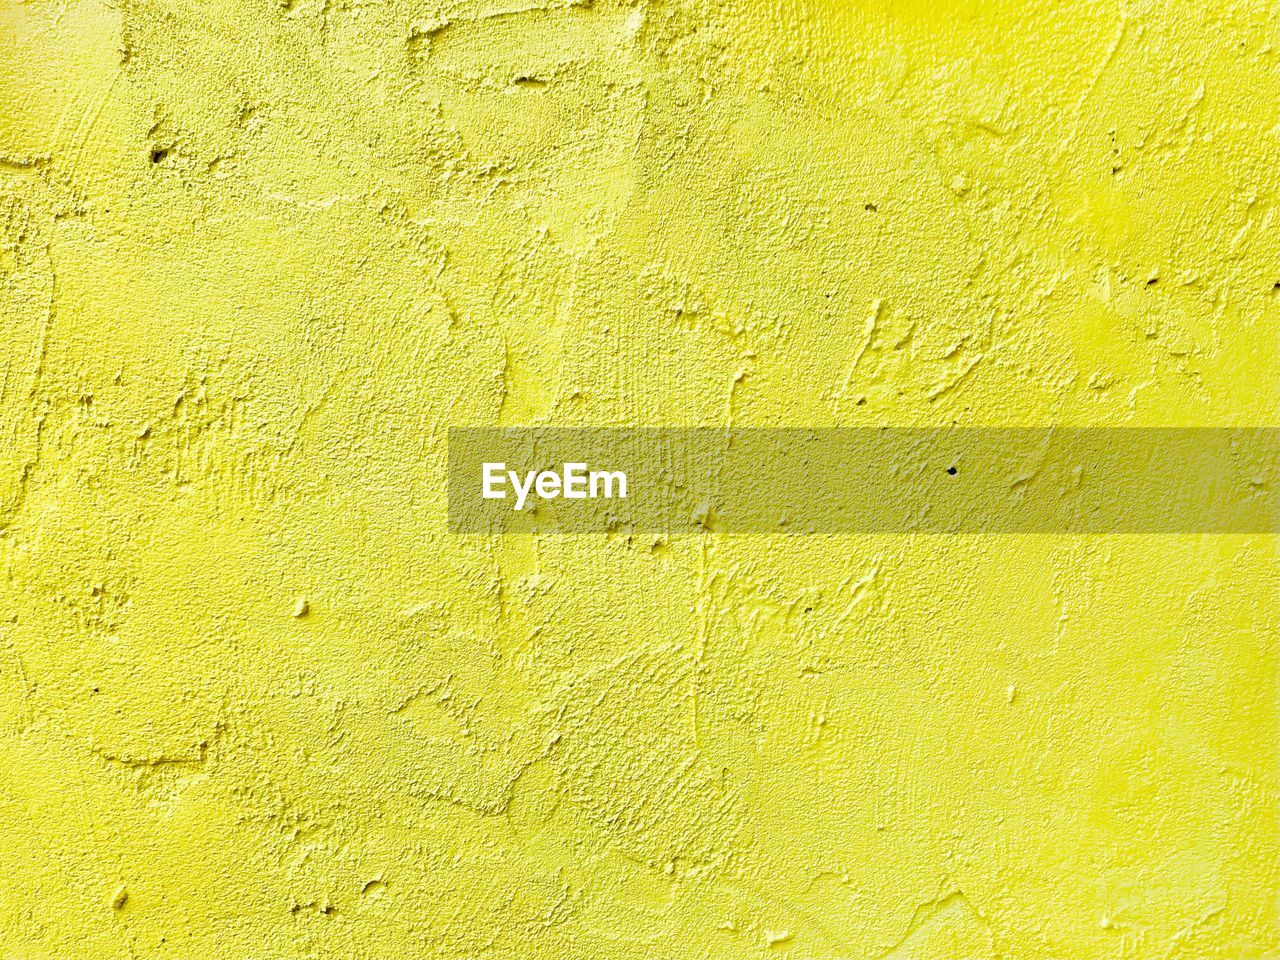 FULL FRAME OF YELLOW WALL